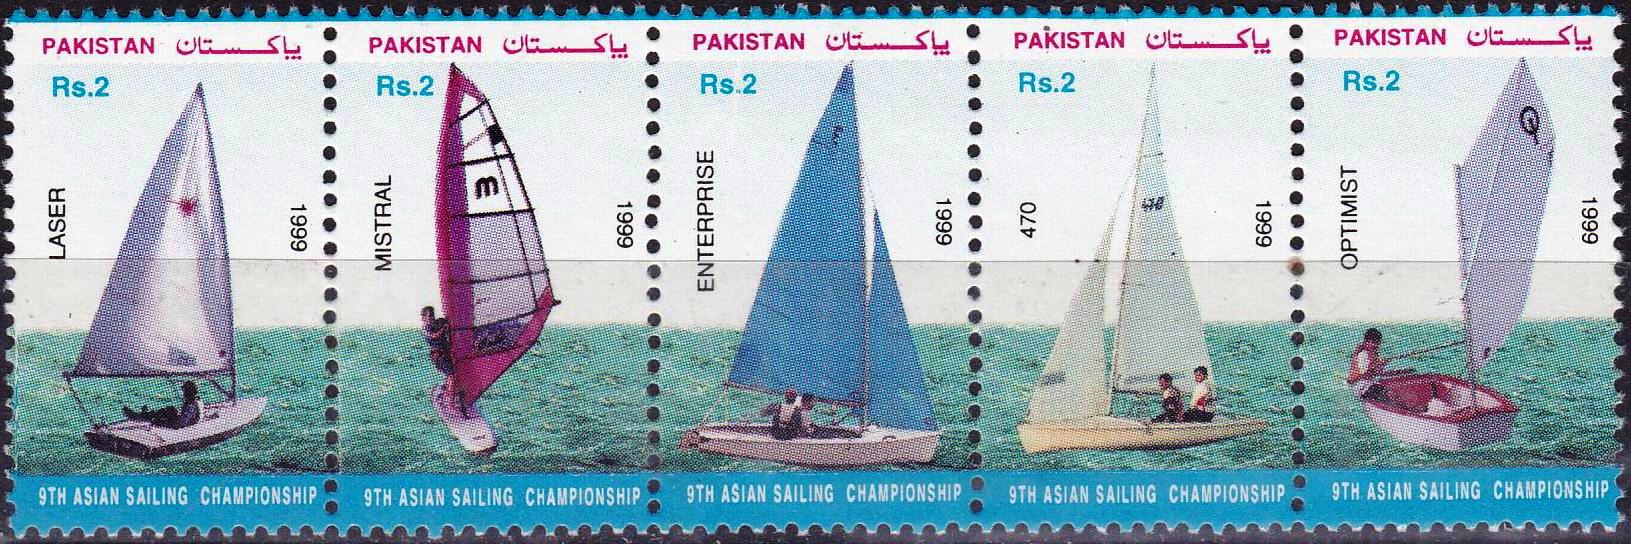 Pakistan Fdc 1999 Brochure & Stamps Asian Sailing Championship - Click Image to Close